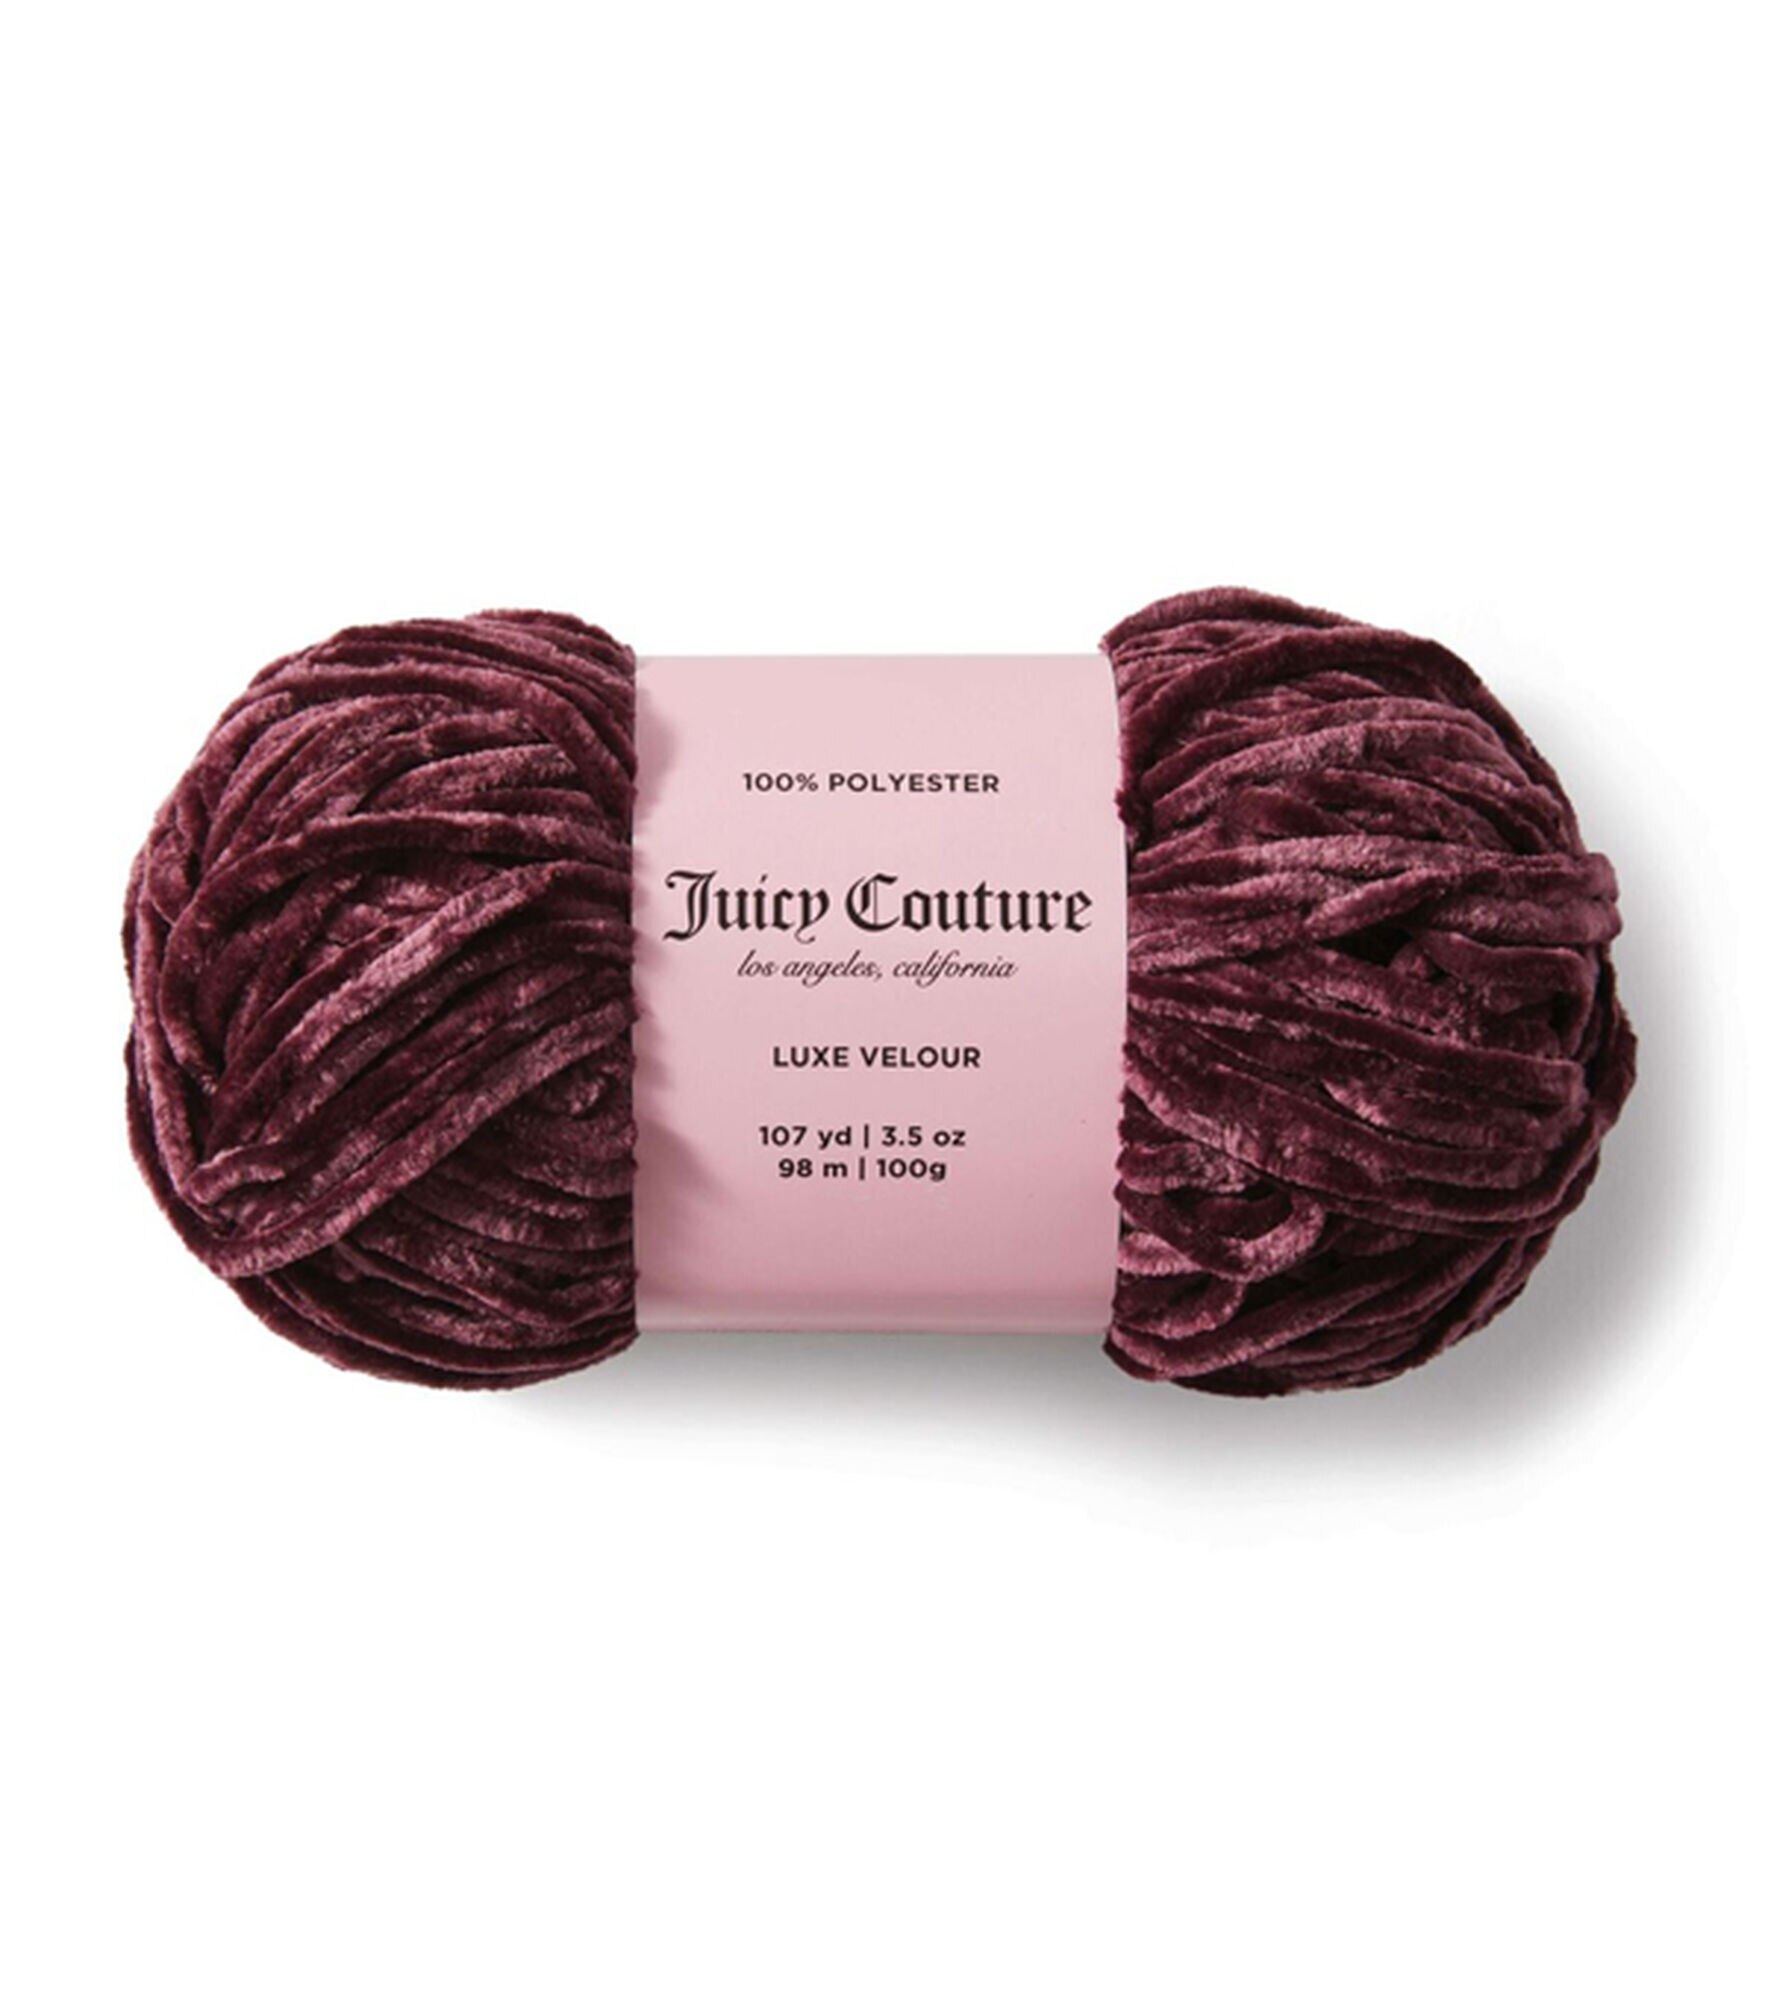 Juicy Couture Luxe Velour 107yds Bulky Polyester Yarn, Plonk, hi-res